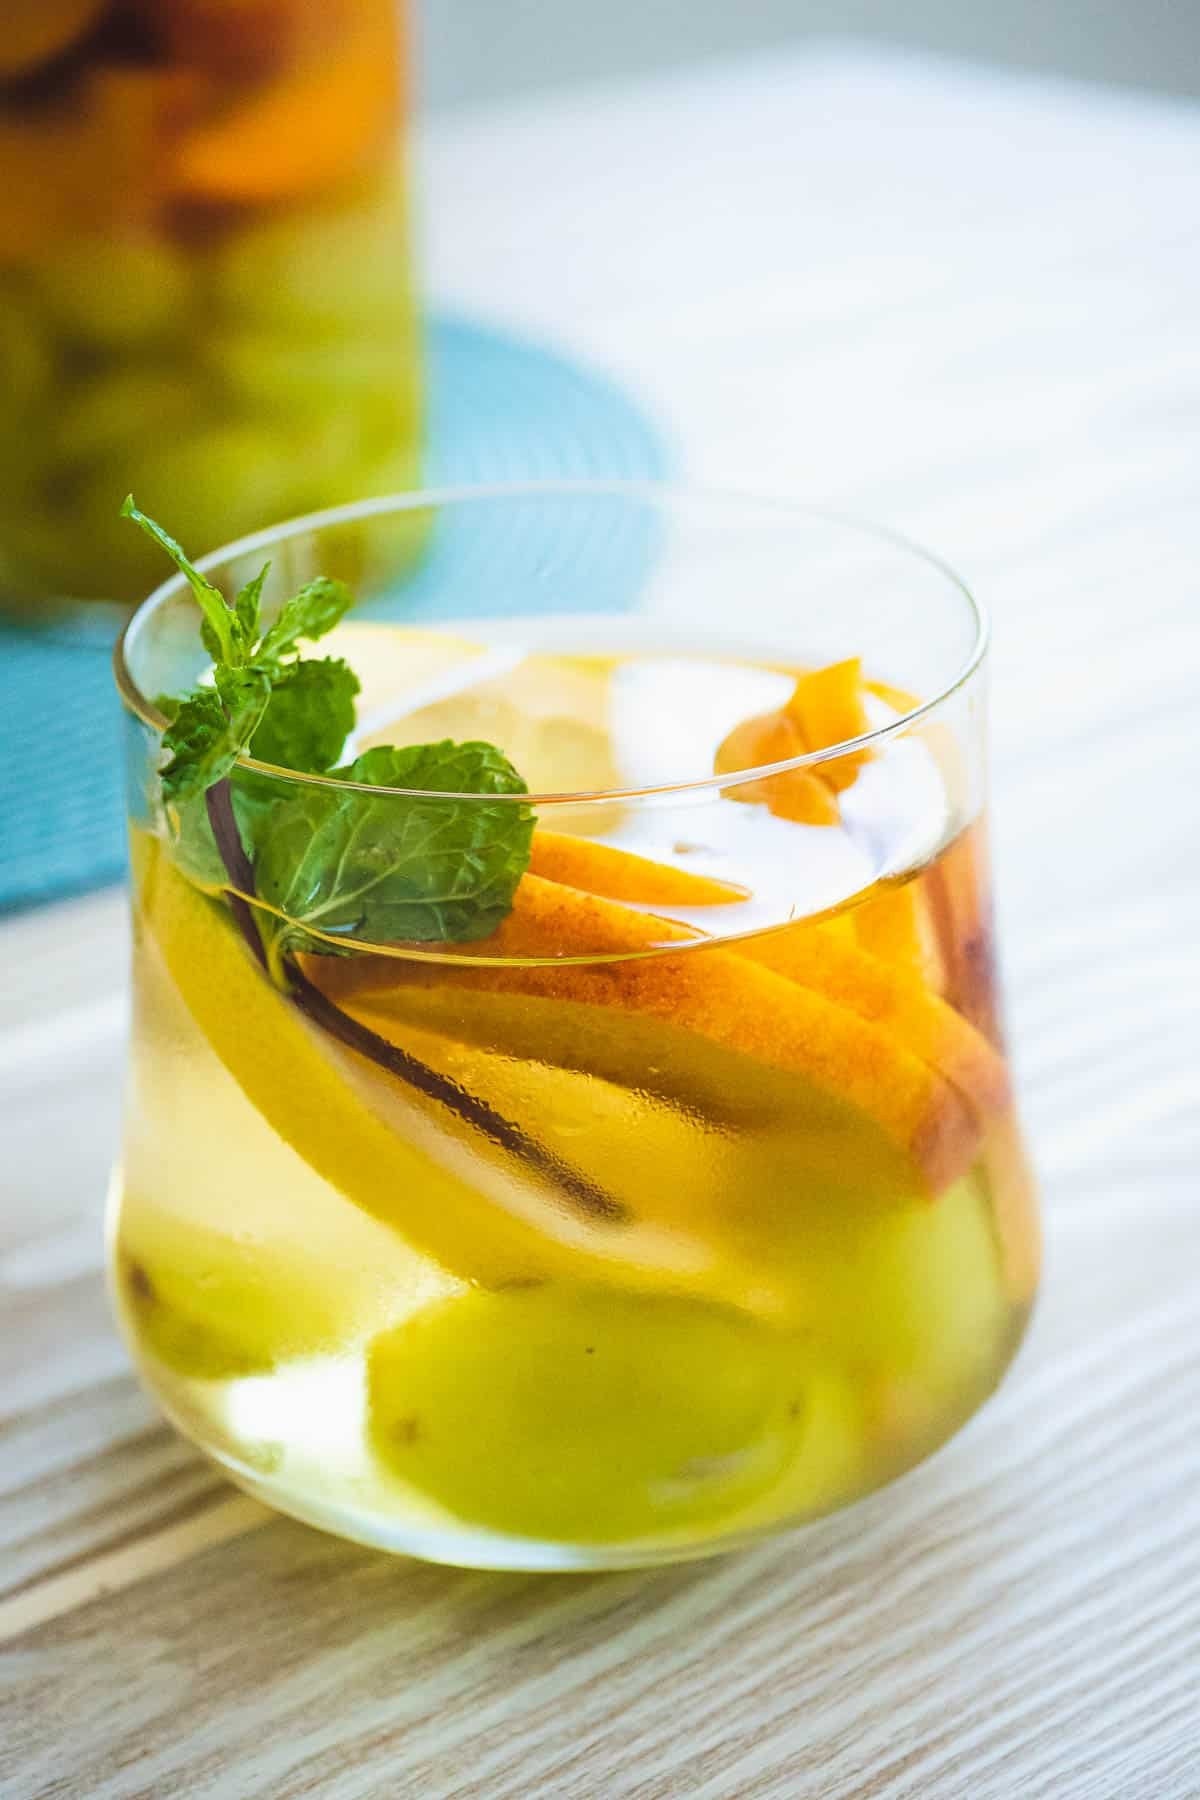 Glass of cold white wine sangria with green grapes, yellow peaches, lemon, and mint.